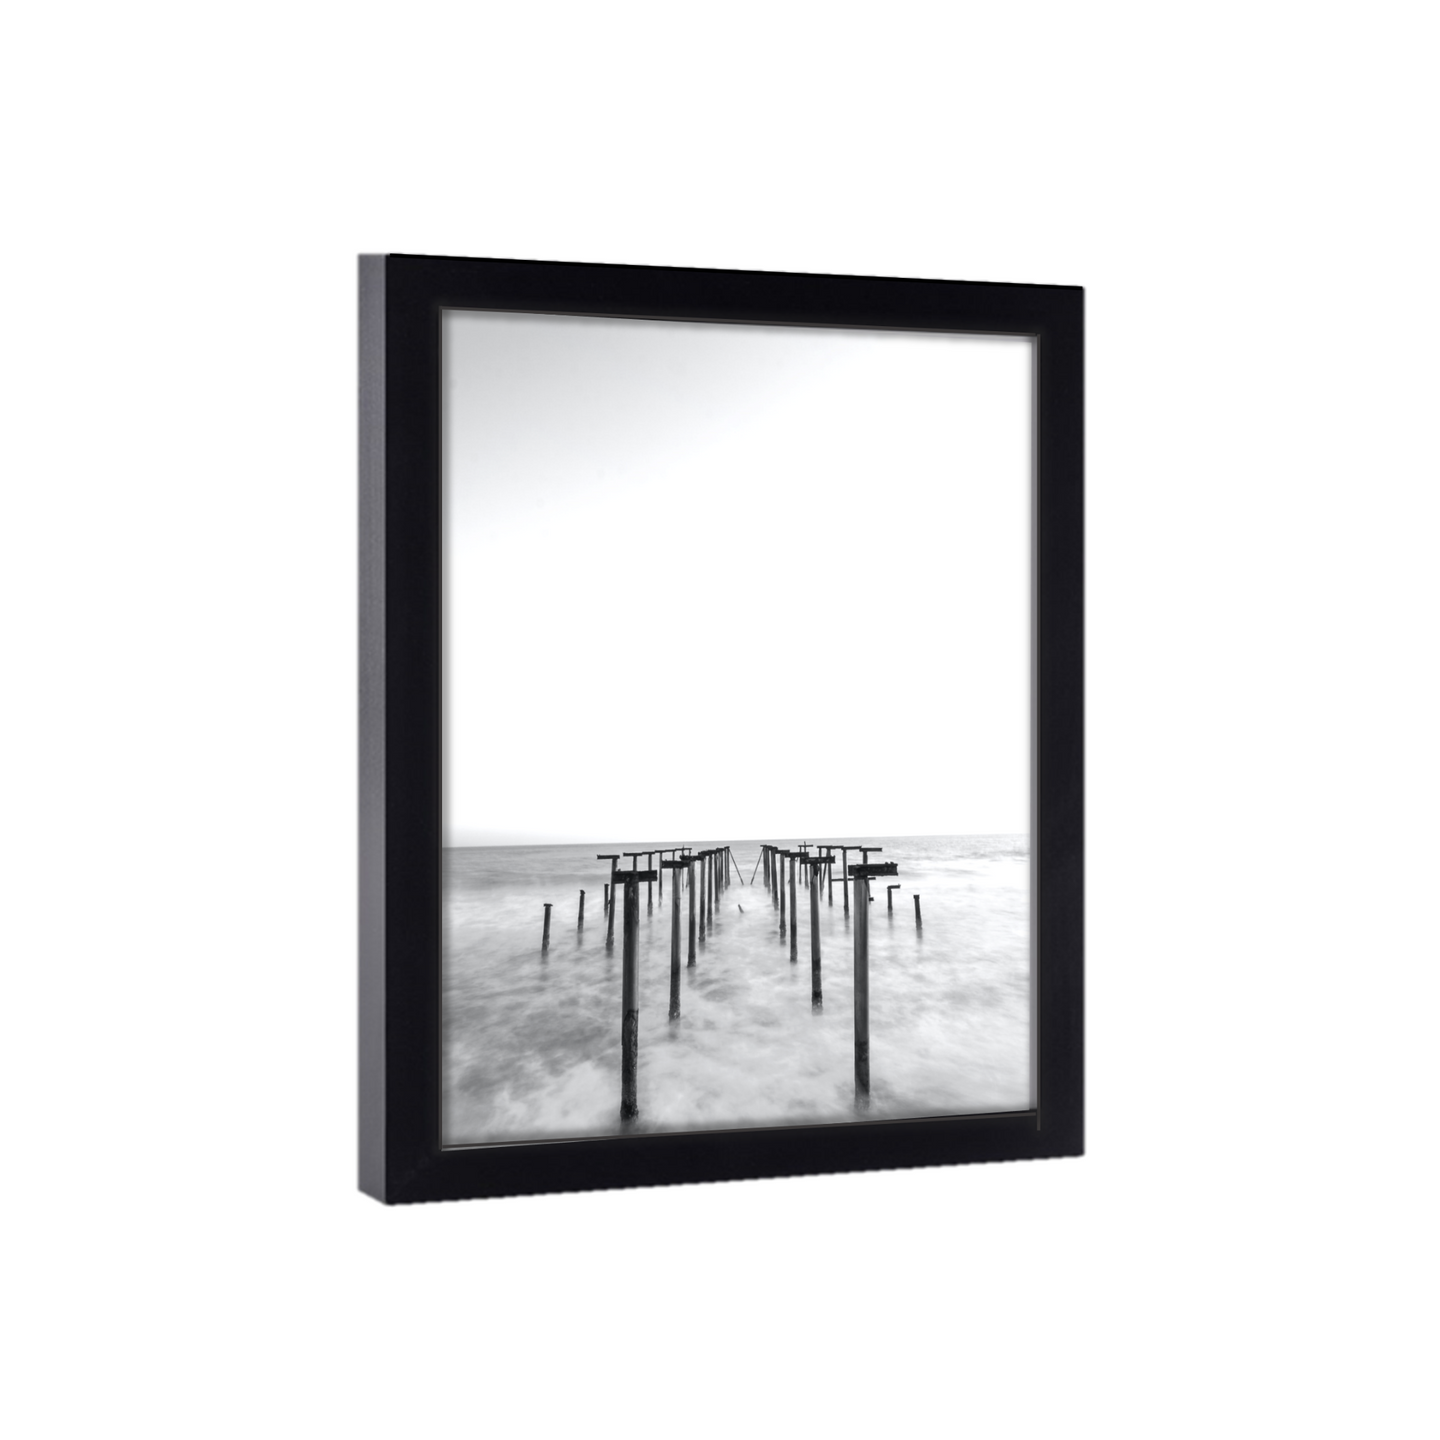 Gallery Wall 8x17 Picture Frame Black Wood 8x17  Poster Size